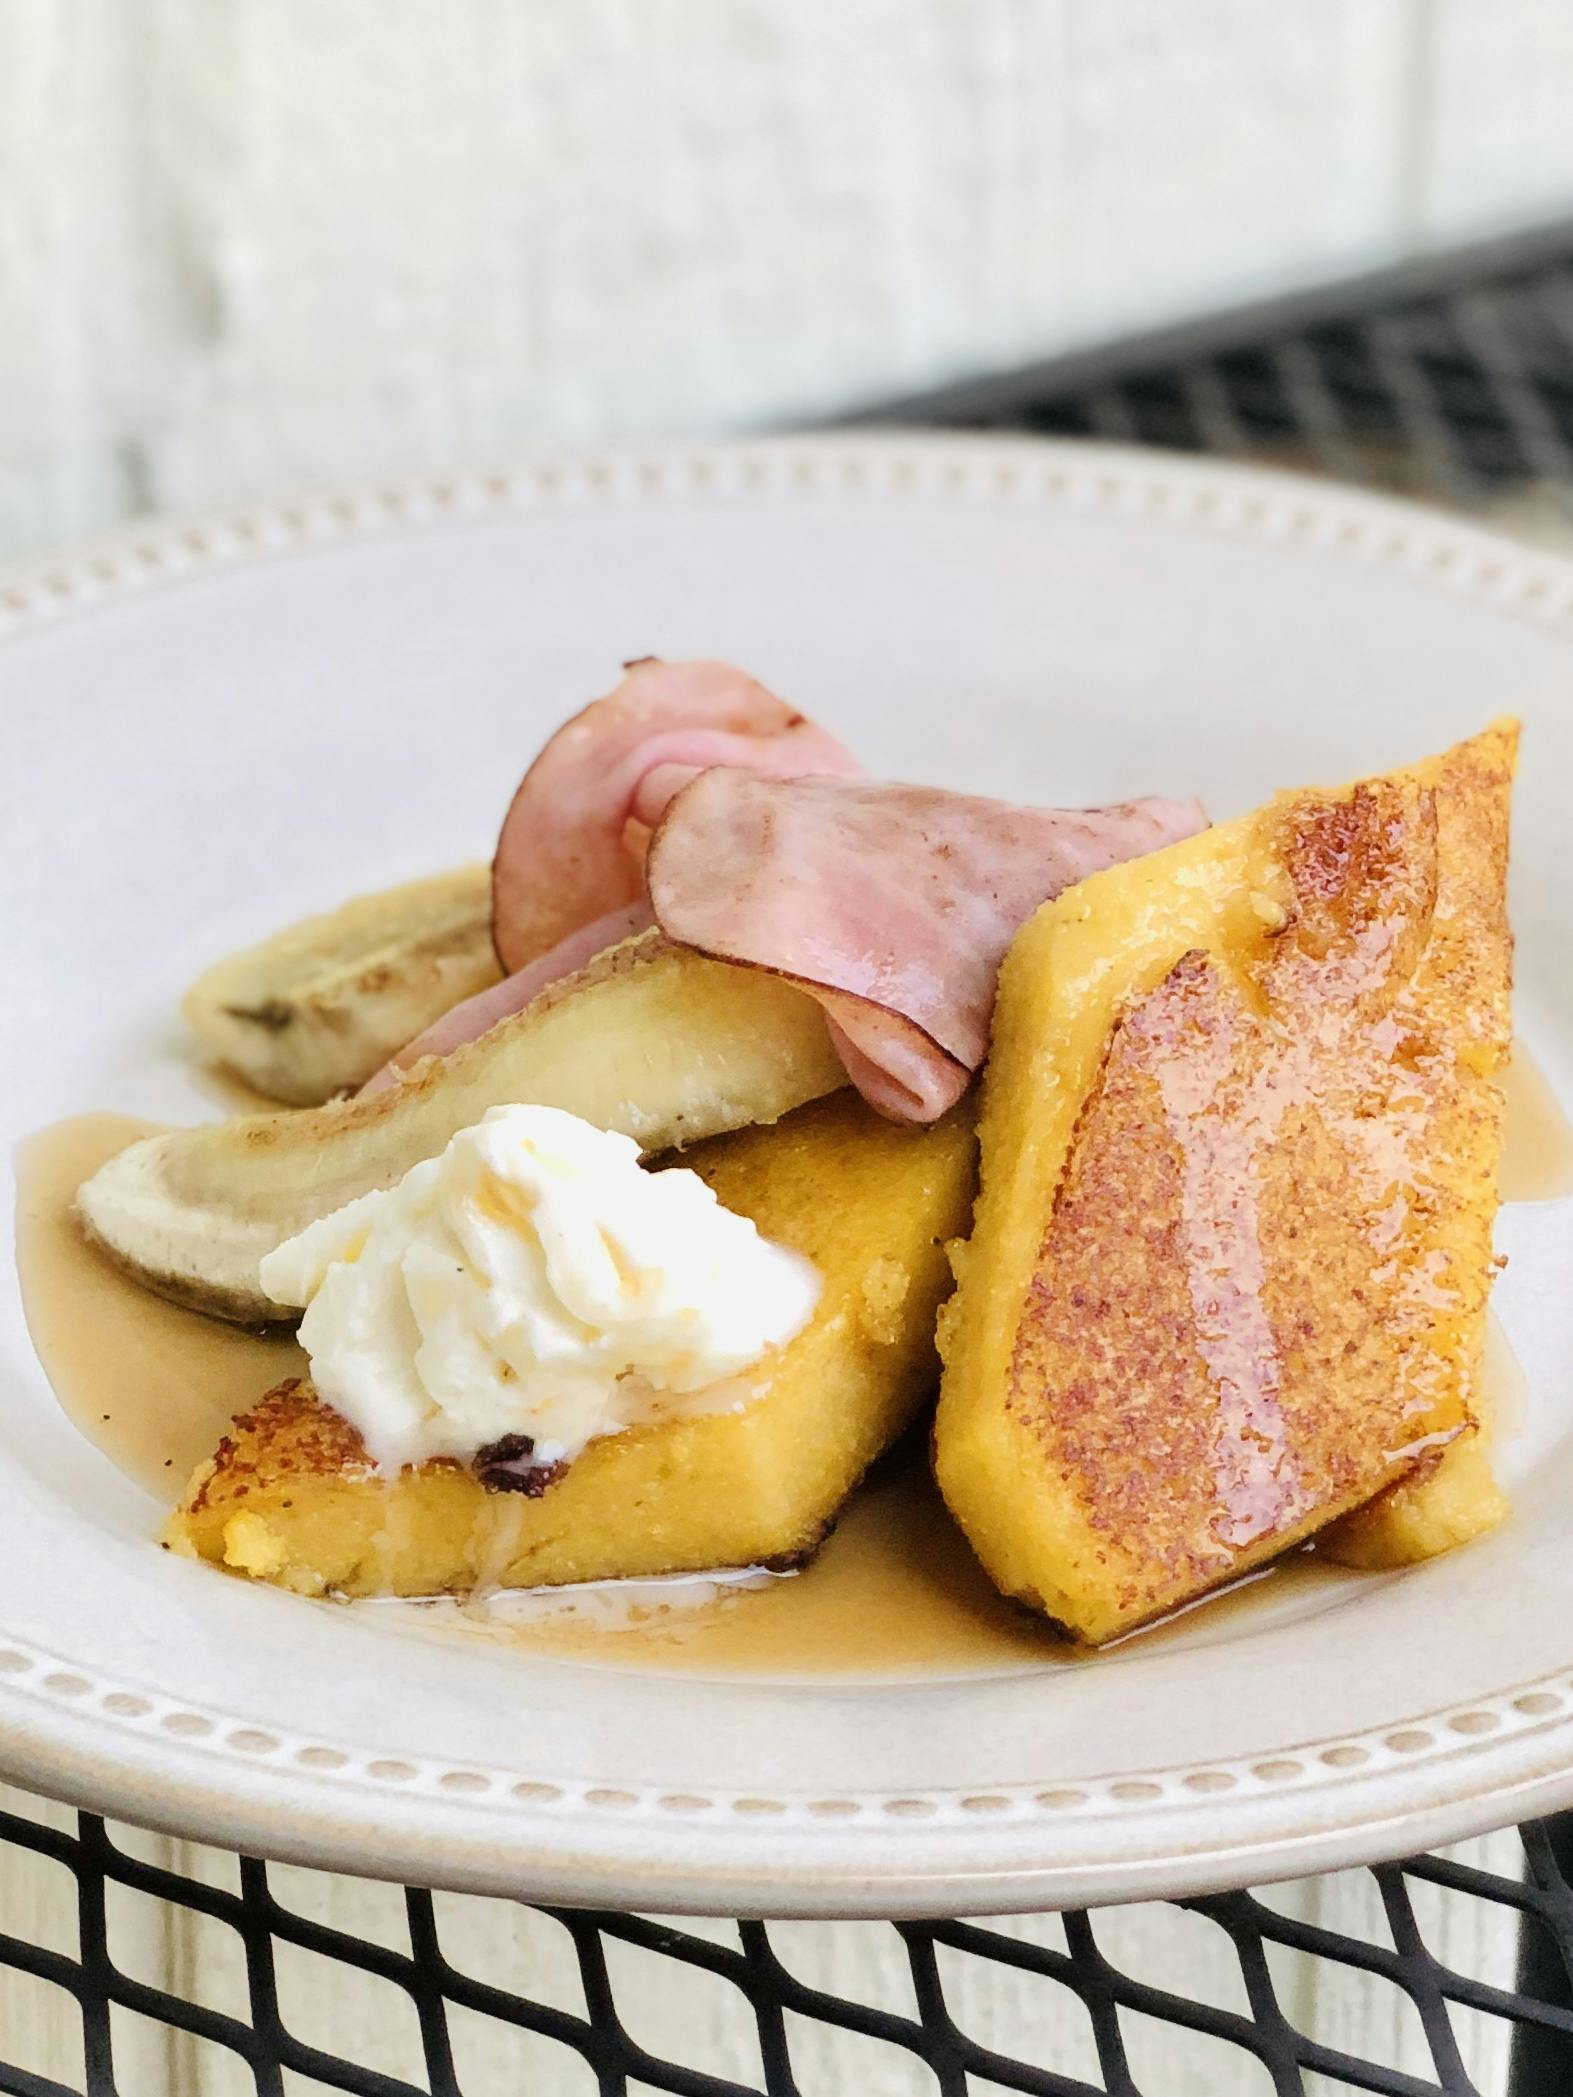 Honeyed griddled cornmeal mush with ham, banana and butter